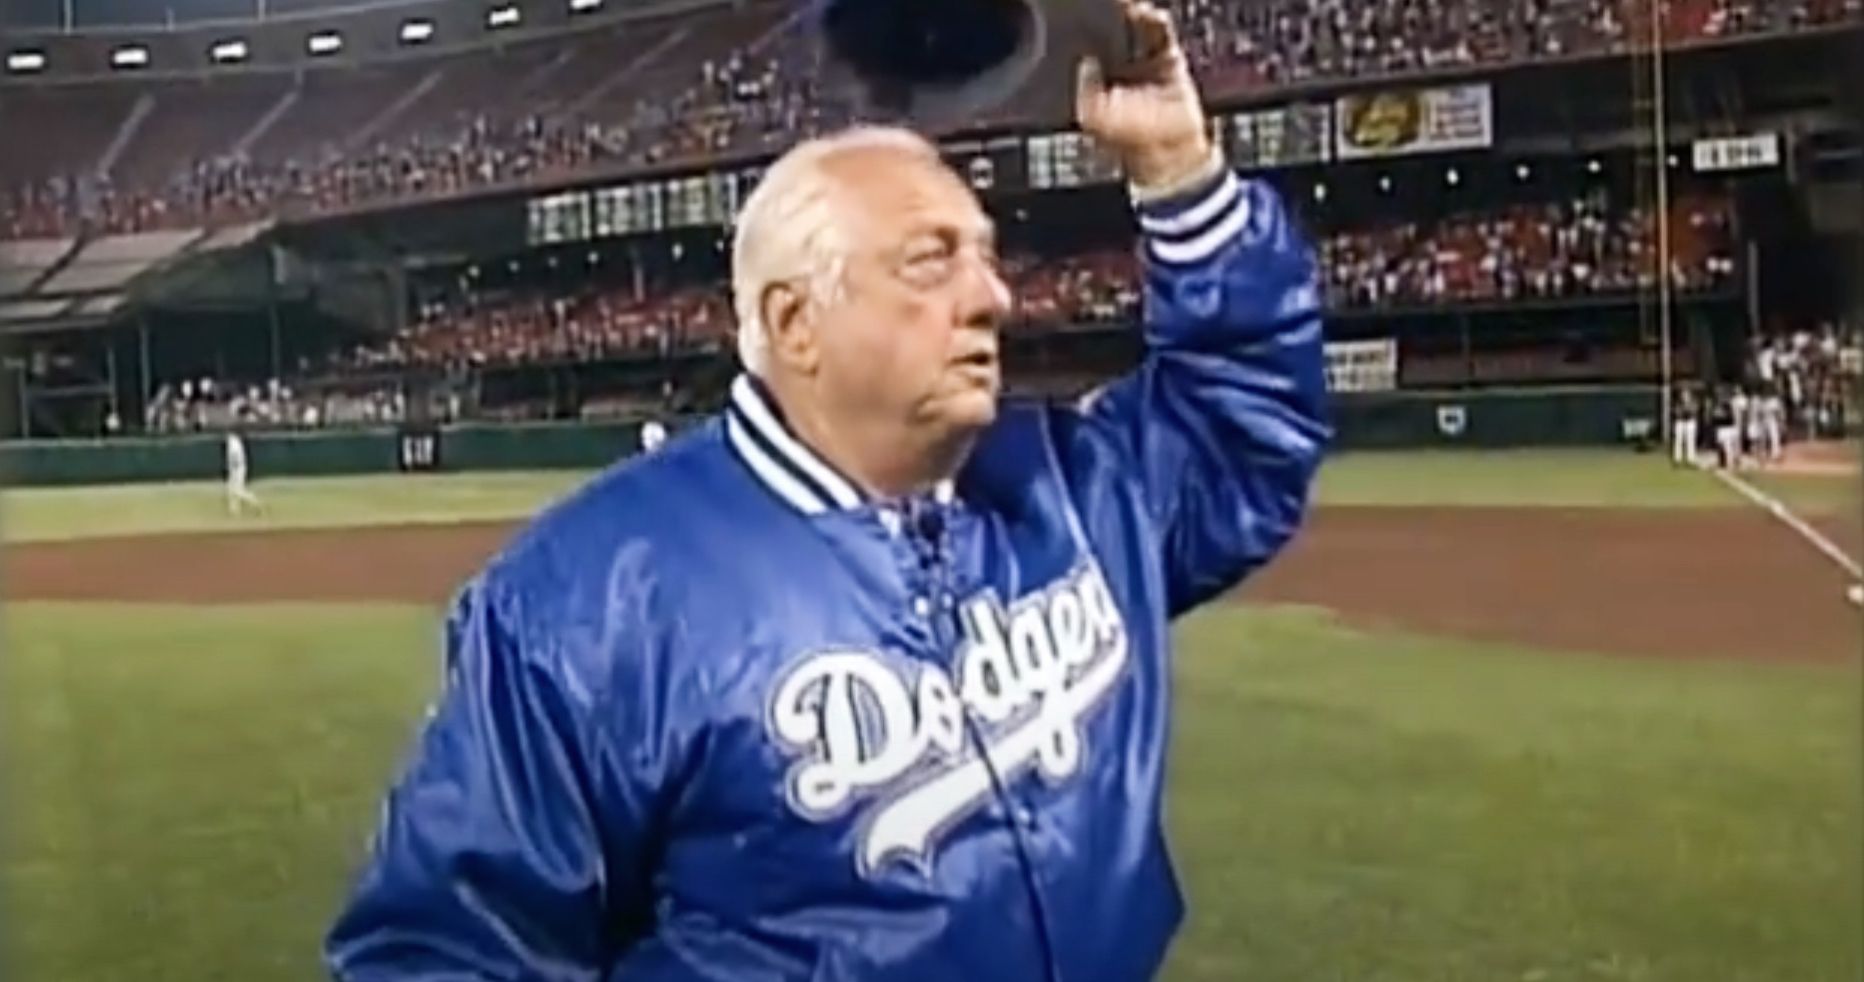 Tommy Lasorda Dies, Iconic Dodgers Manager Was 93